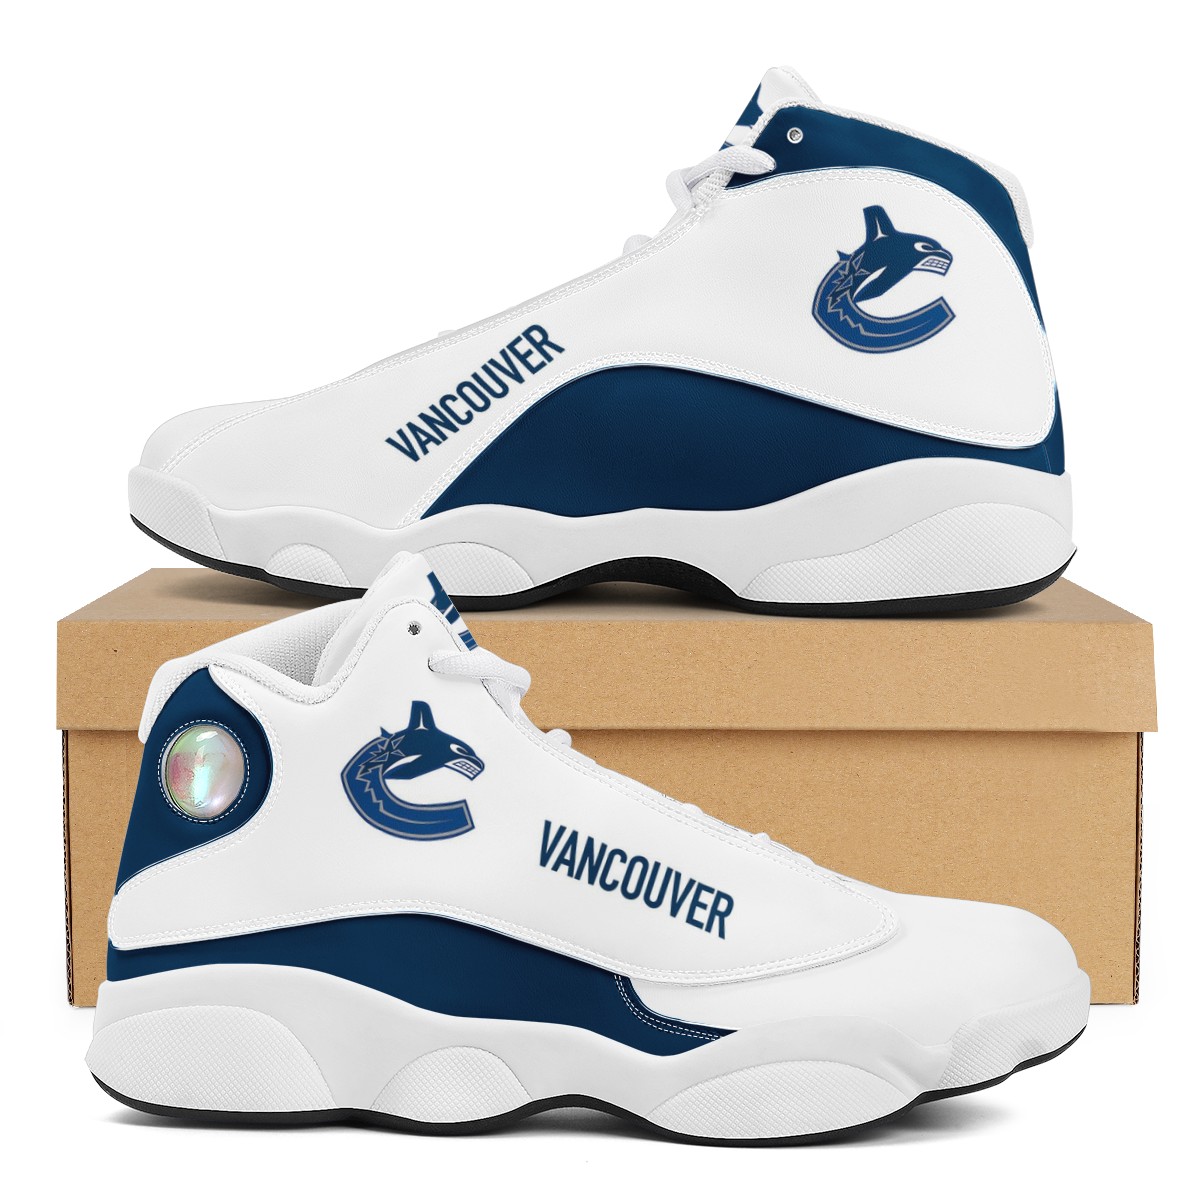 Men's Vancouver Canucks Limited Edition JD13 Sneakers 002